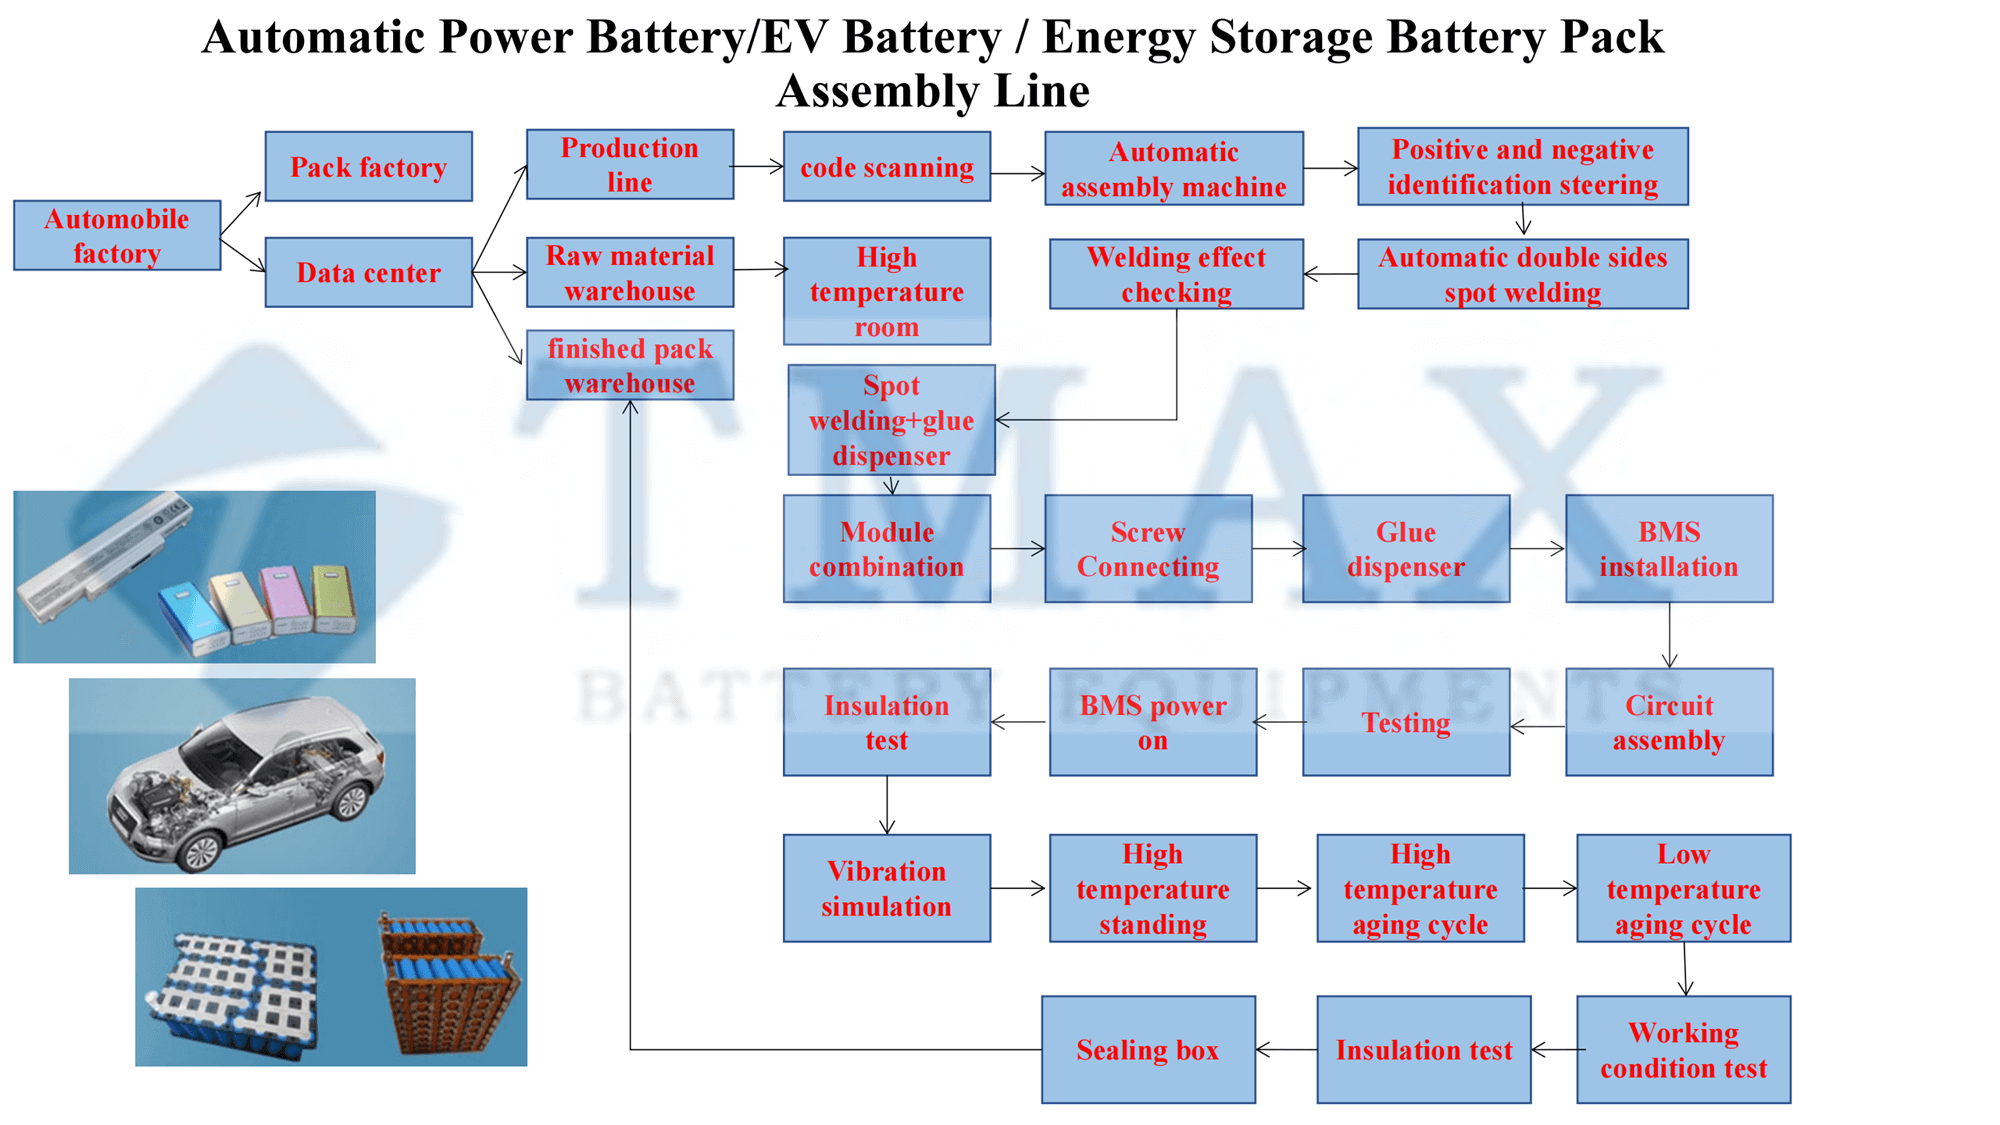  Energy Storage Battery Pack Assembly Line